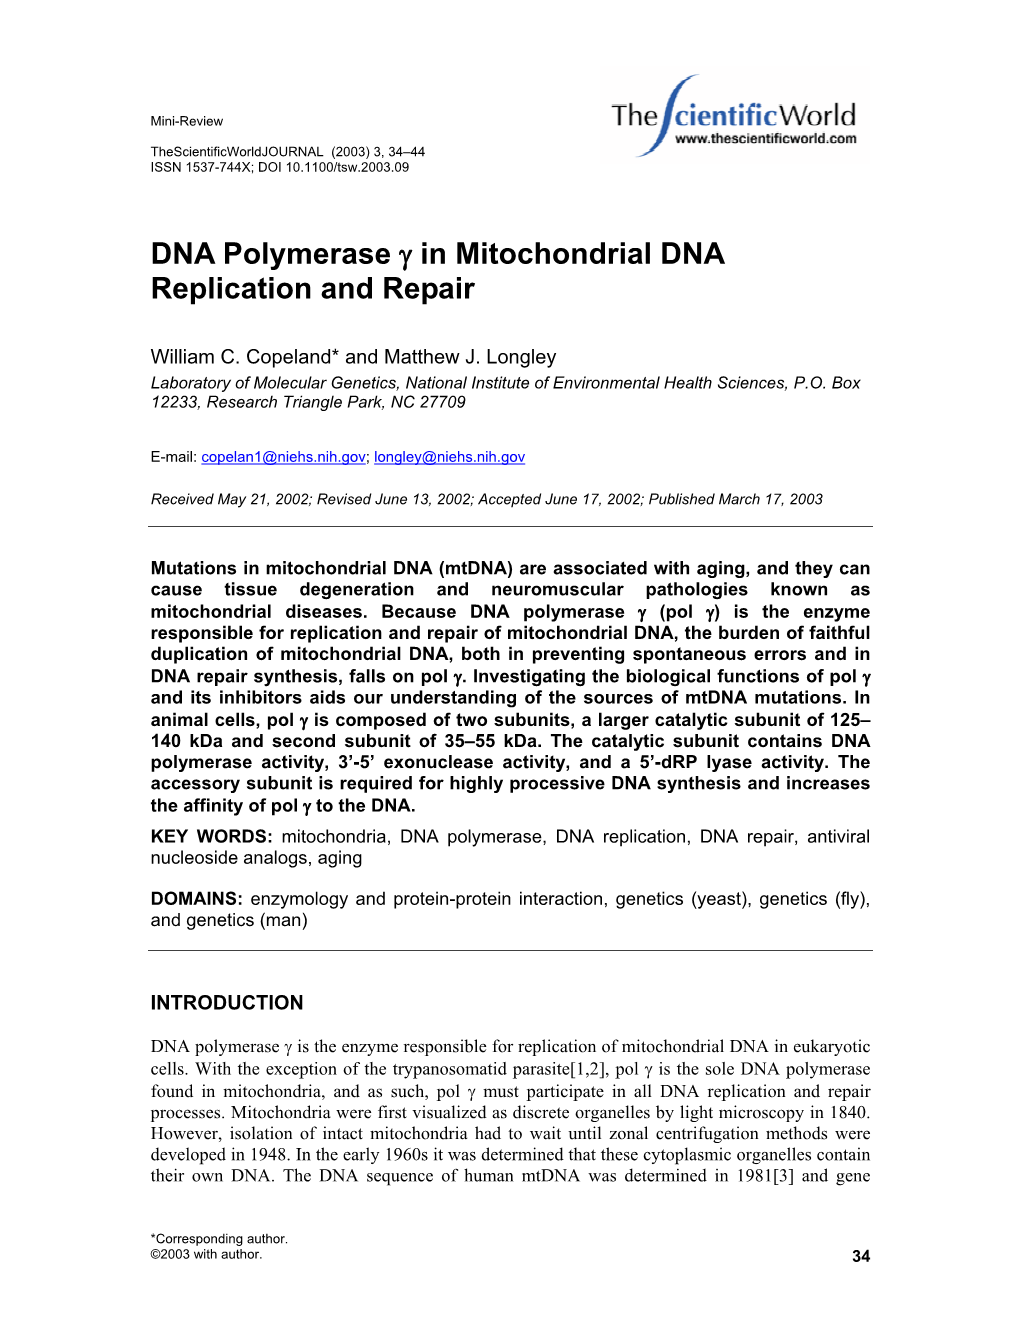 DNA Polymerase Γ in Mitochondrial DNA Replication and Repair